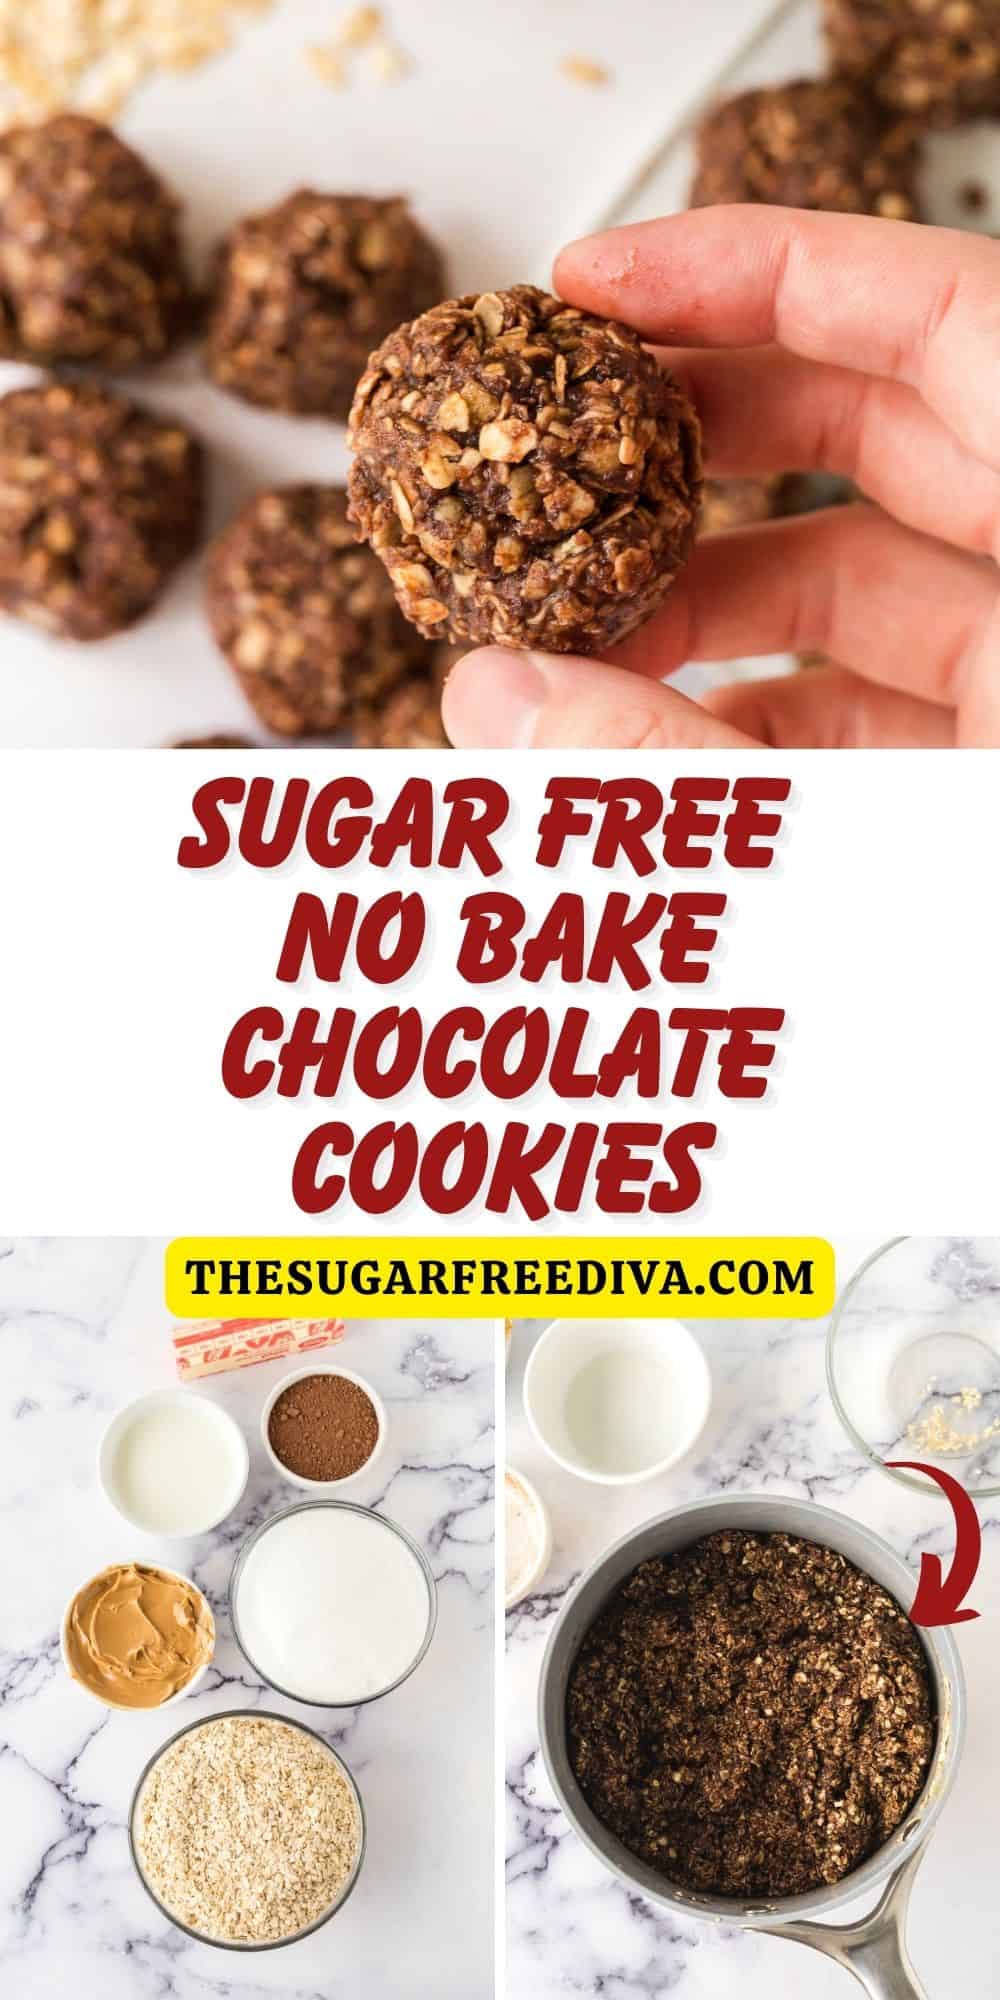 No Bake Sugar Free Chocolate Cookies, a simple and delicious dessert recipe made with oatmeal, peanut butter, and unsweetened cocoa. GF SF